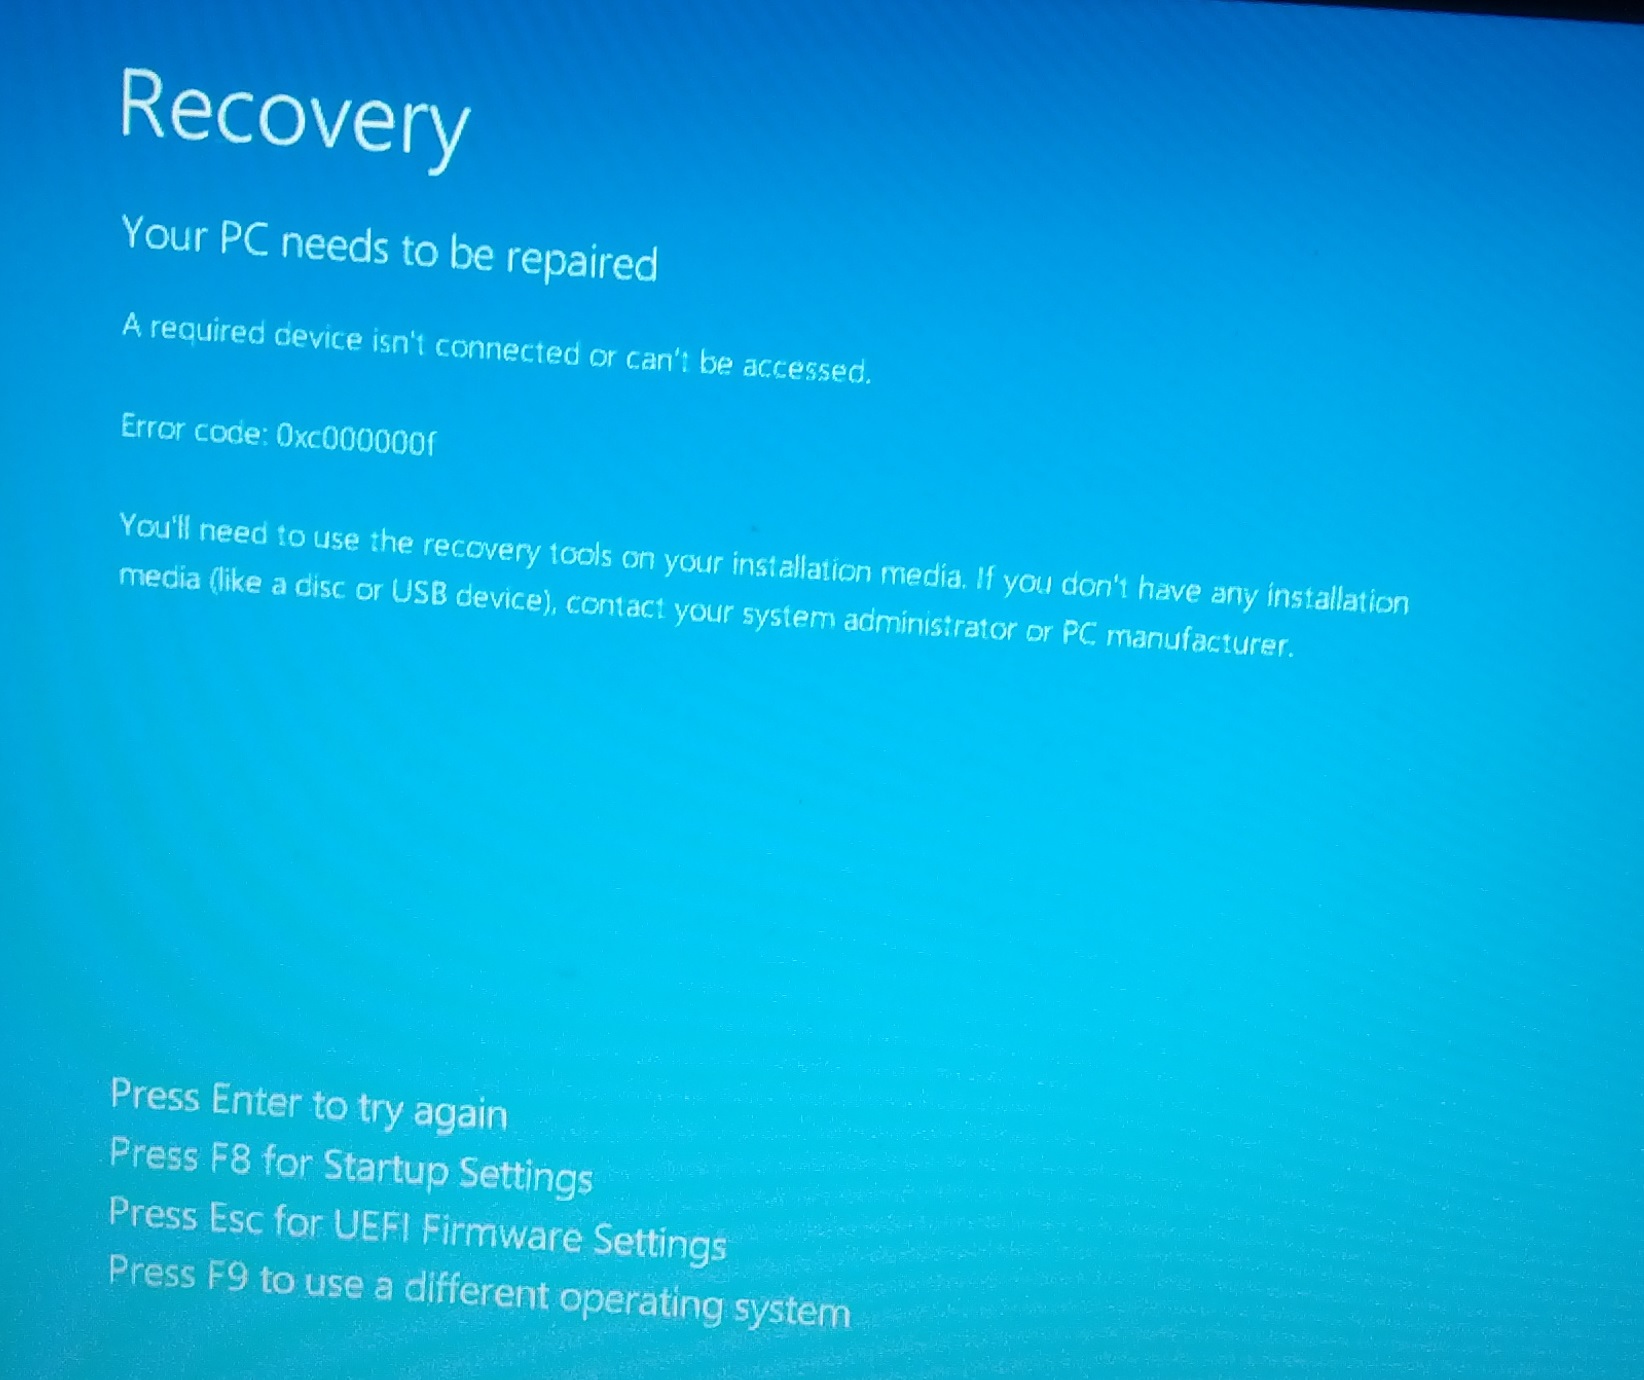 Windows 8 Recovery failed; Error code: 0xc000000f - HP Support ...